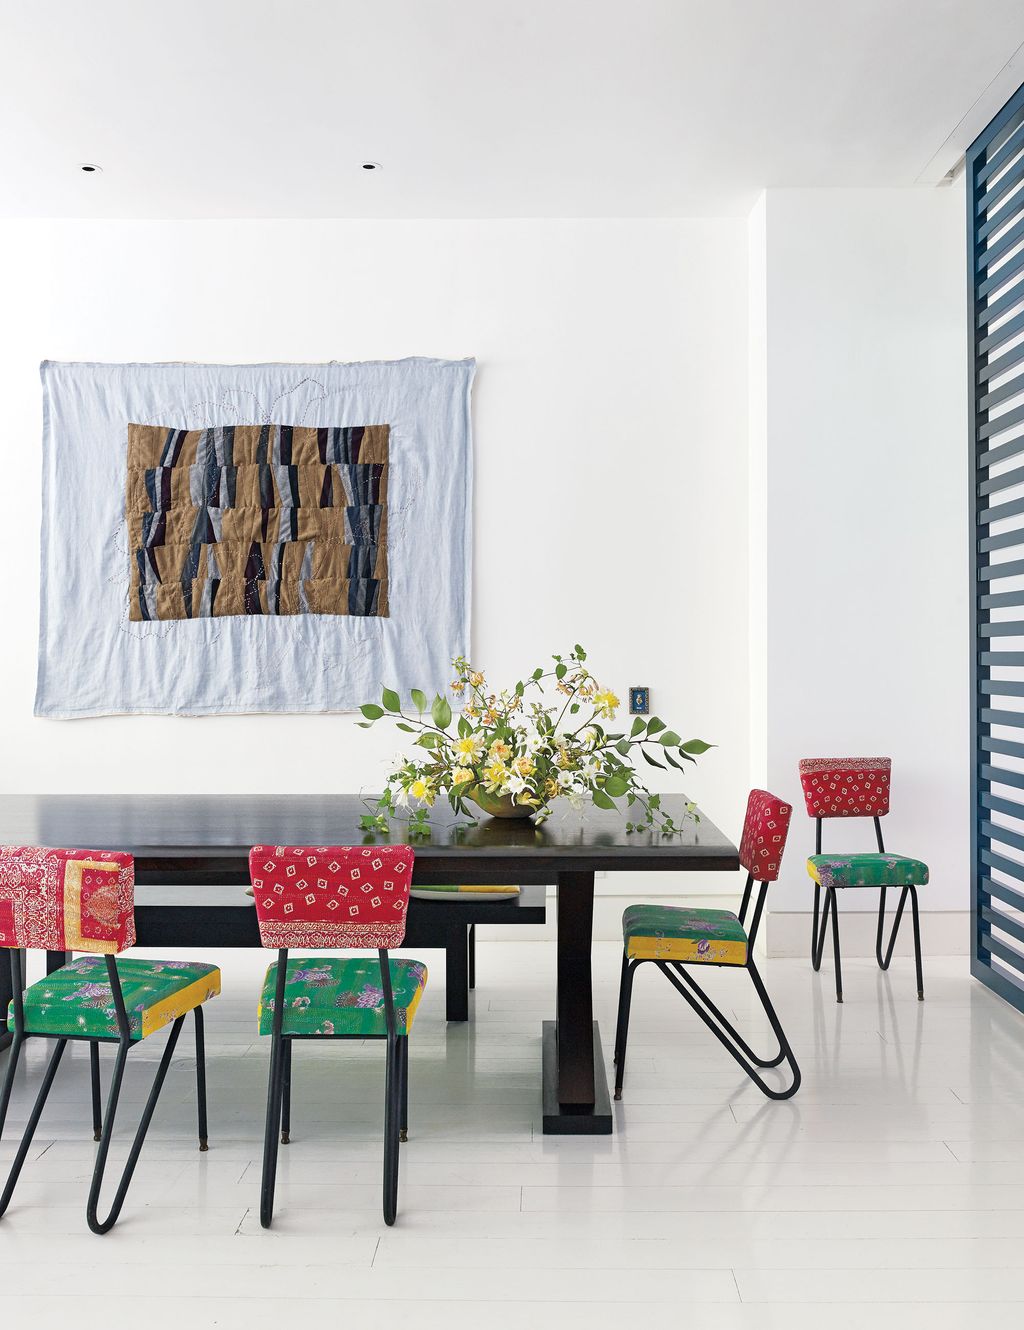 An Ideal Artists’ Townhouse, With a Bit of Morocco Thrown In